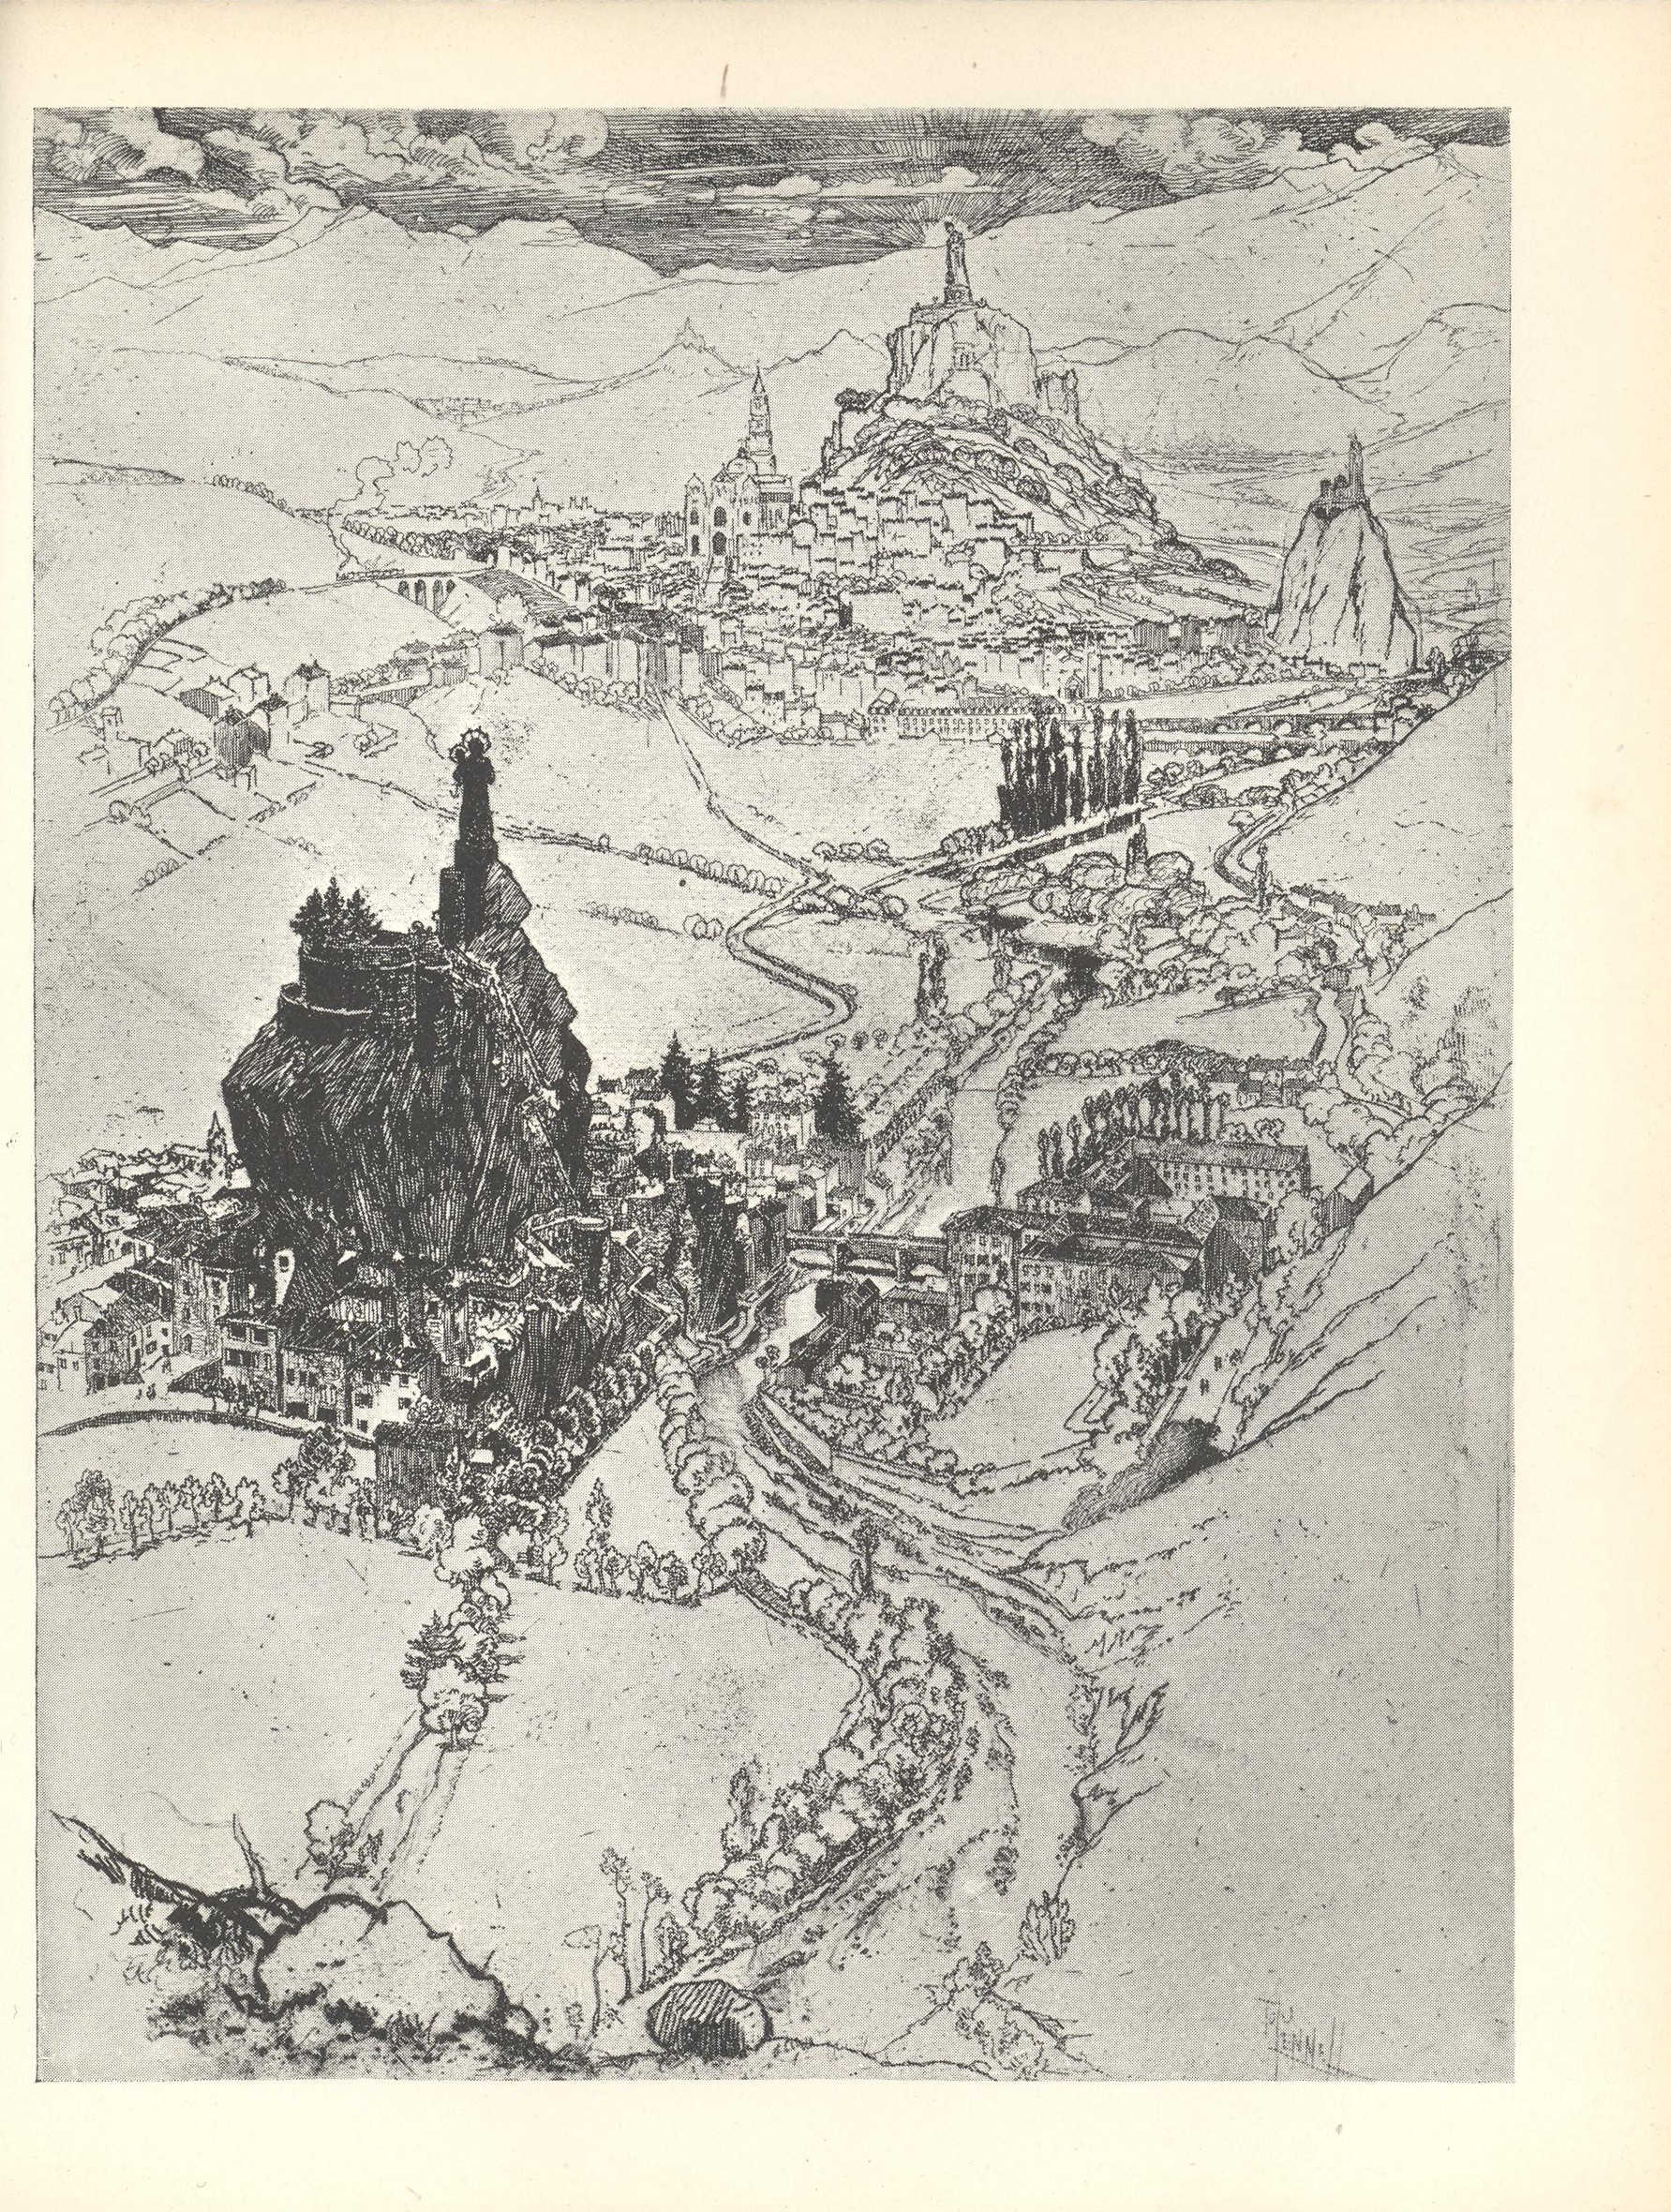 Image features a downward view of a river valley The river starts at the bottom centre of the image and winds upward dividing the image in half On the middle left side there is a medieval town that is dark with shadows To the upper right is another town which is lighter in colour The two towns are connected by a road running parallel to the river in the middle of the page Both towns have a large central hill which is topped by a religious statue A landscape of mountains trees and other buildings surround the towns filling the remaining 2 3rds of the frame Artist s signature is in the bottom right The image is vertically displayed